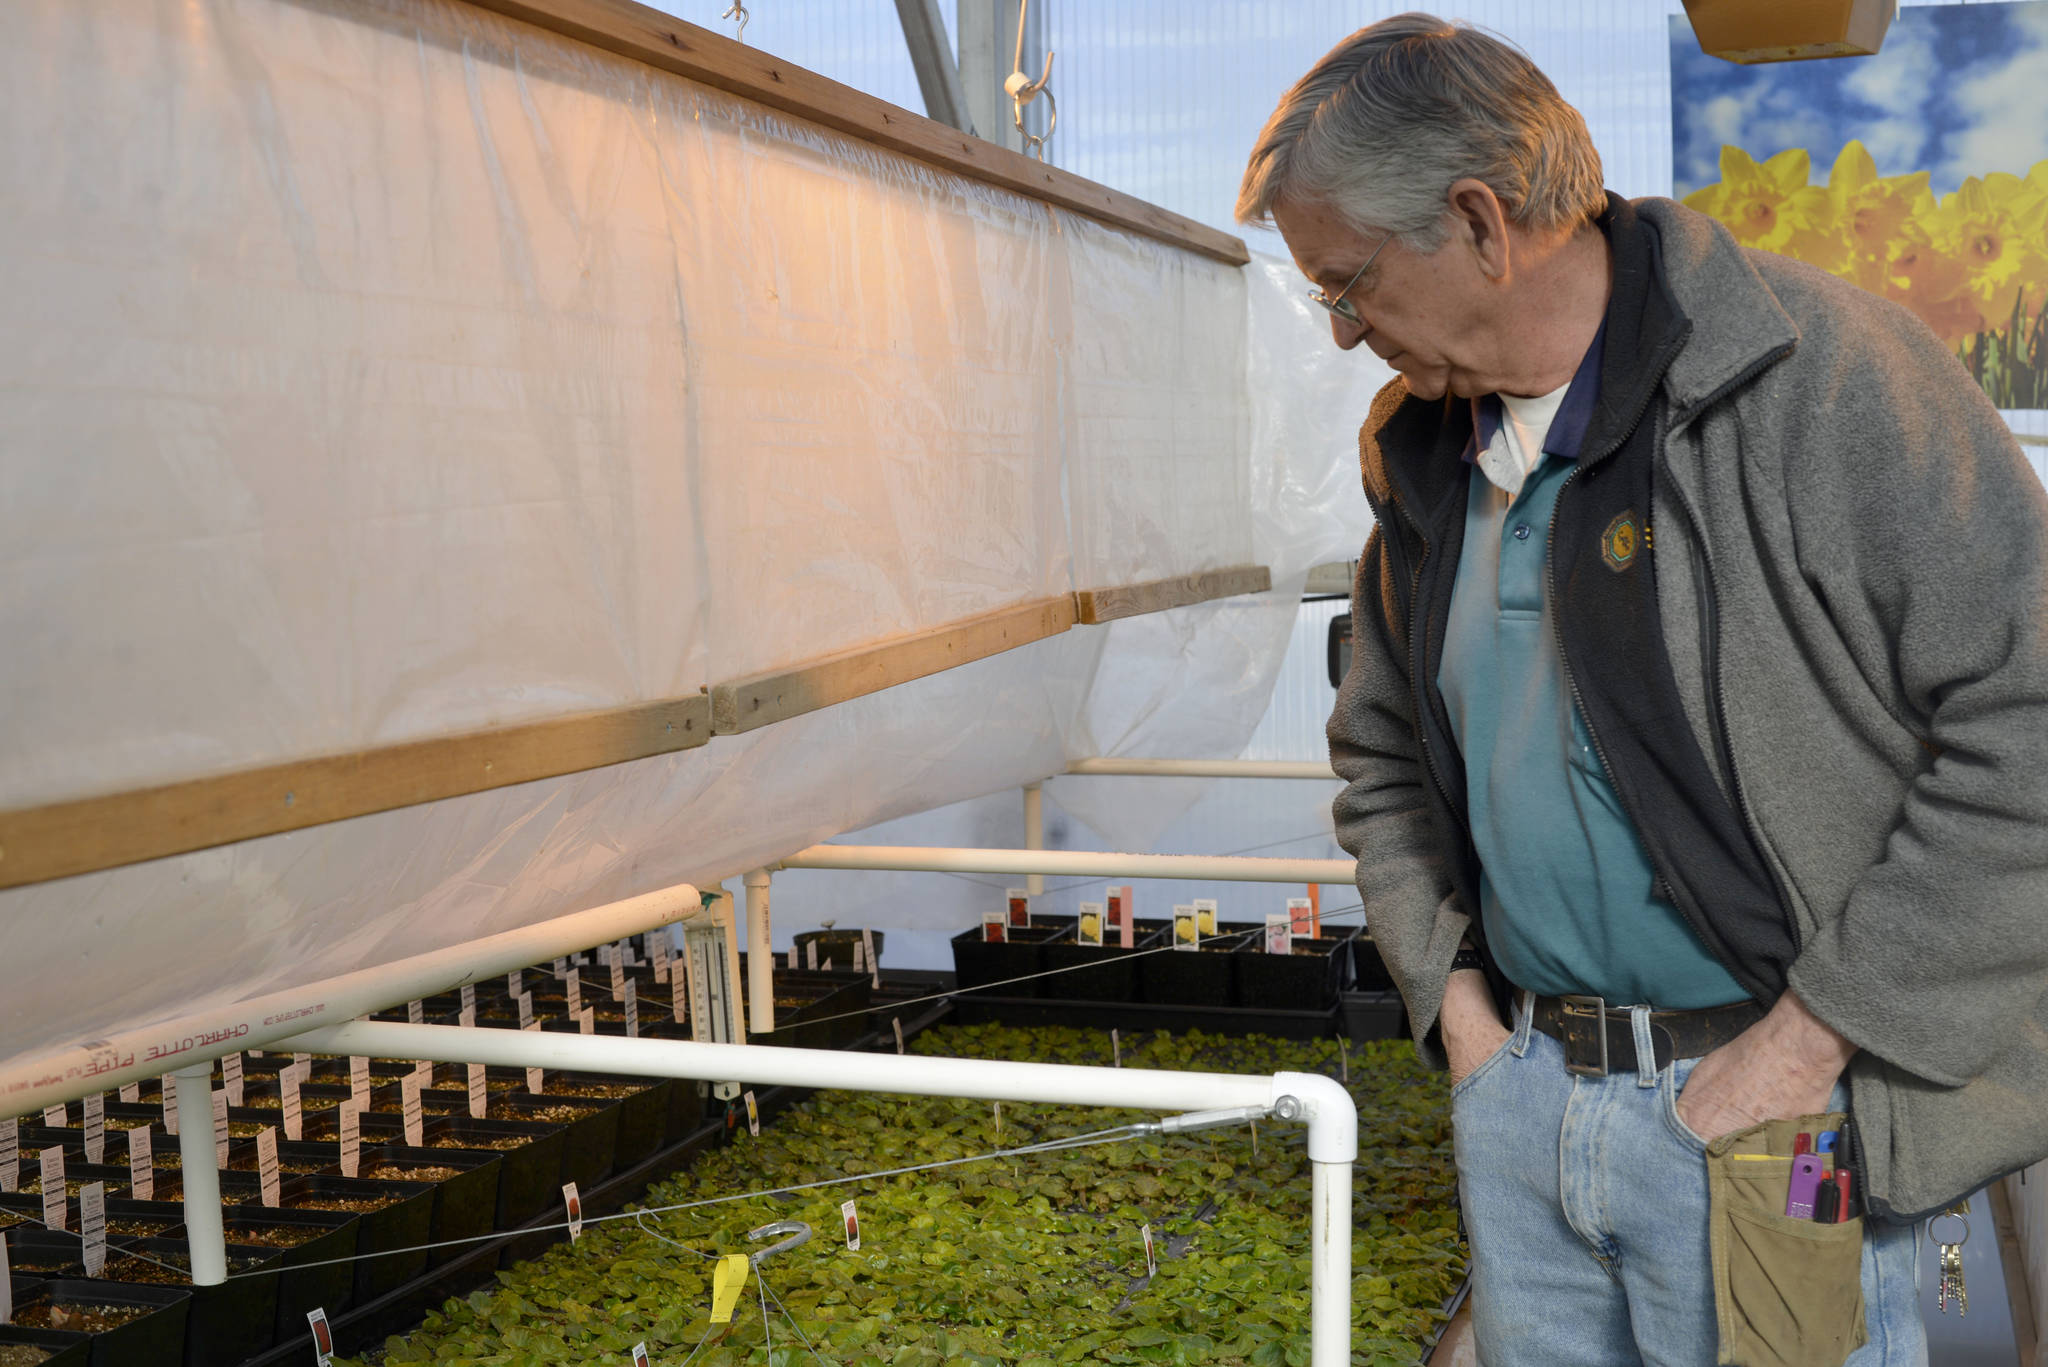 Ron Sexton, owner of Trinity Greenhouse in Soldotna, checks his germination chamber to ensure that the nearly 6000 begonia plants within them are growing properly. (Kat Sorensen/Peninsula Clarion)